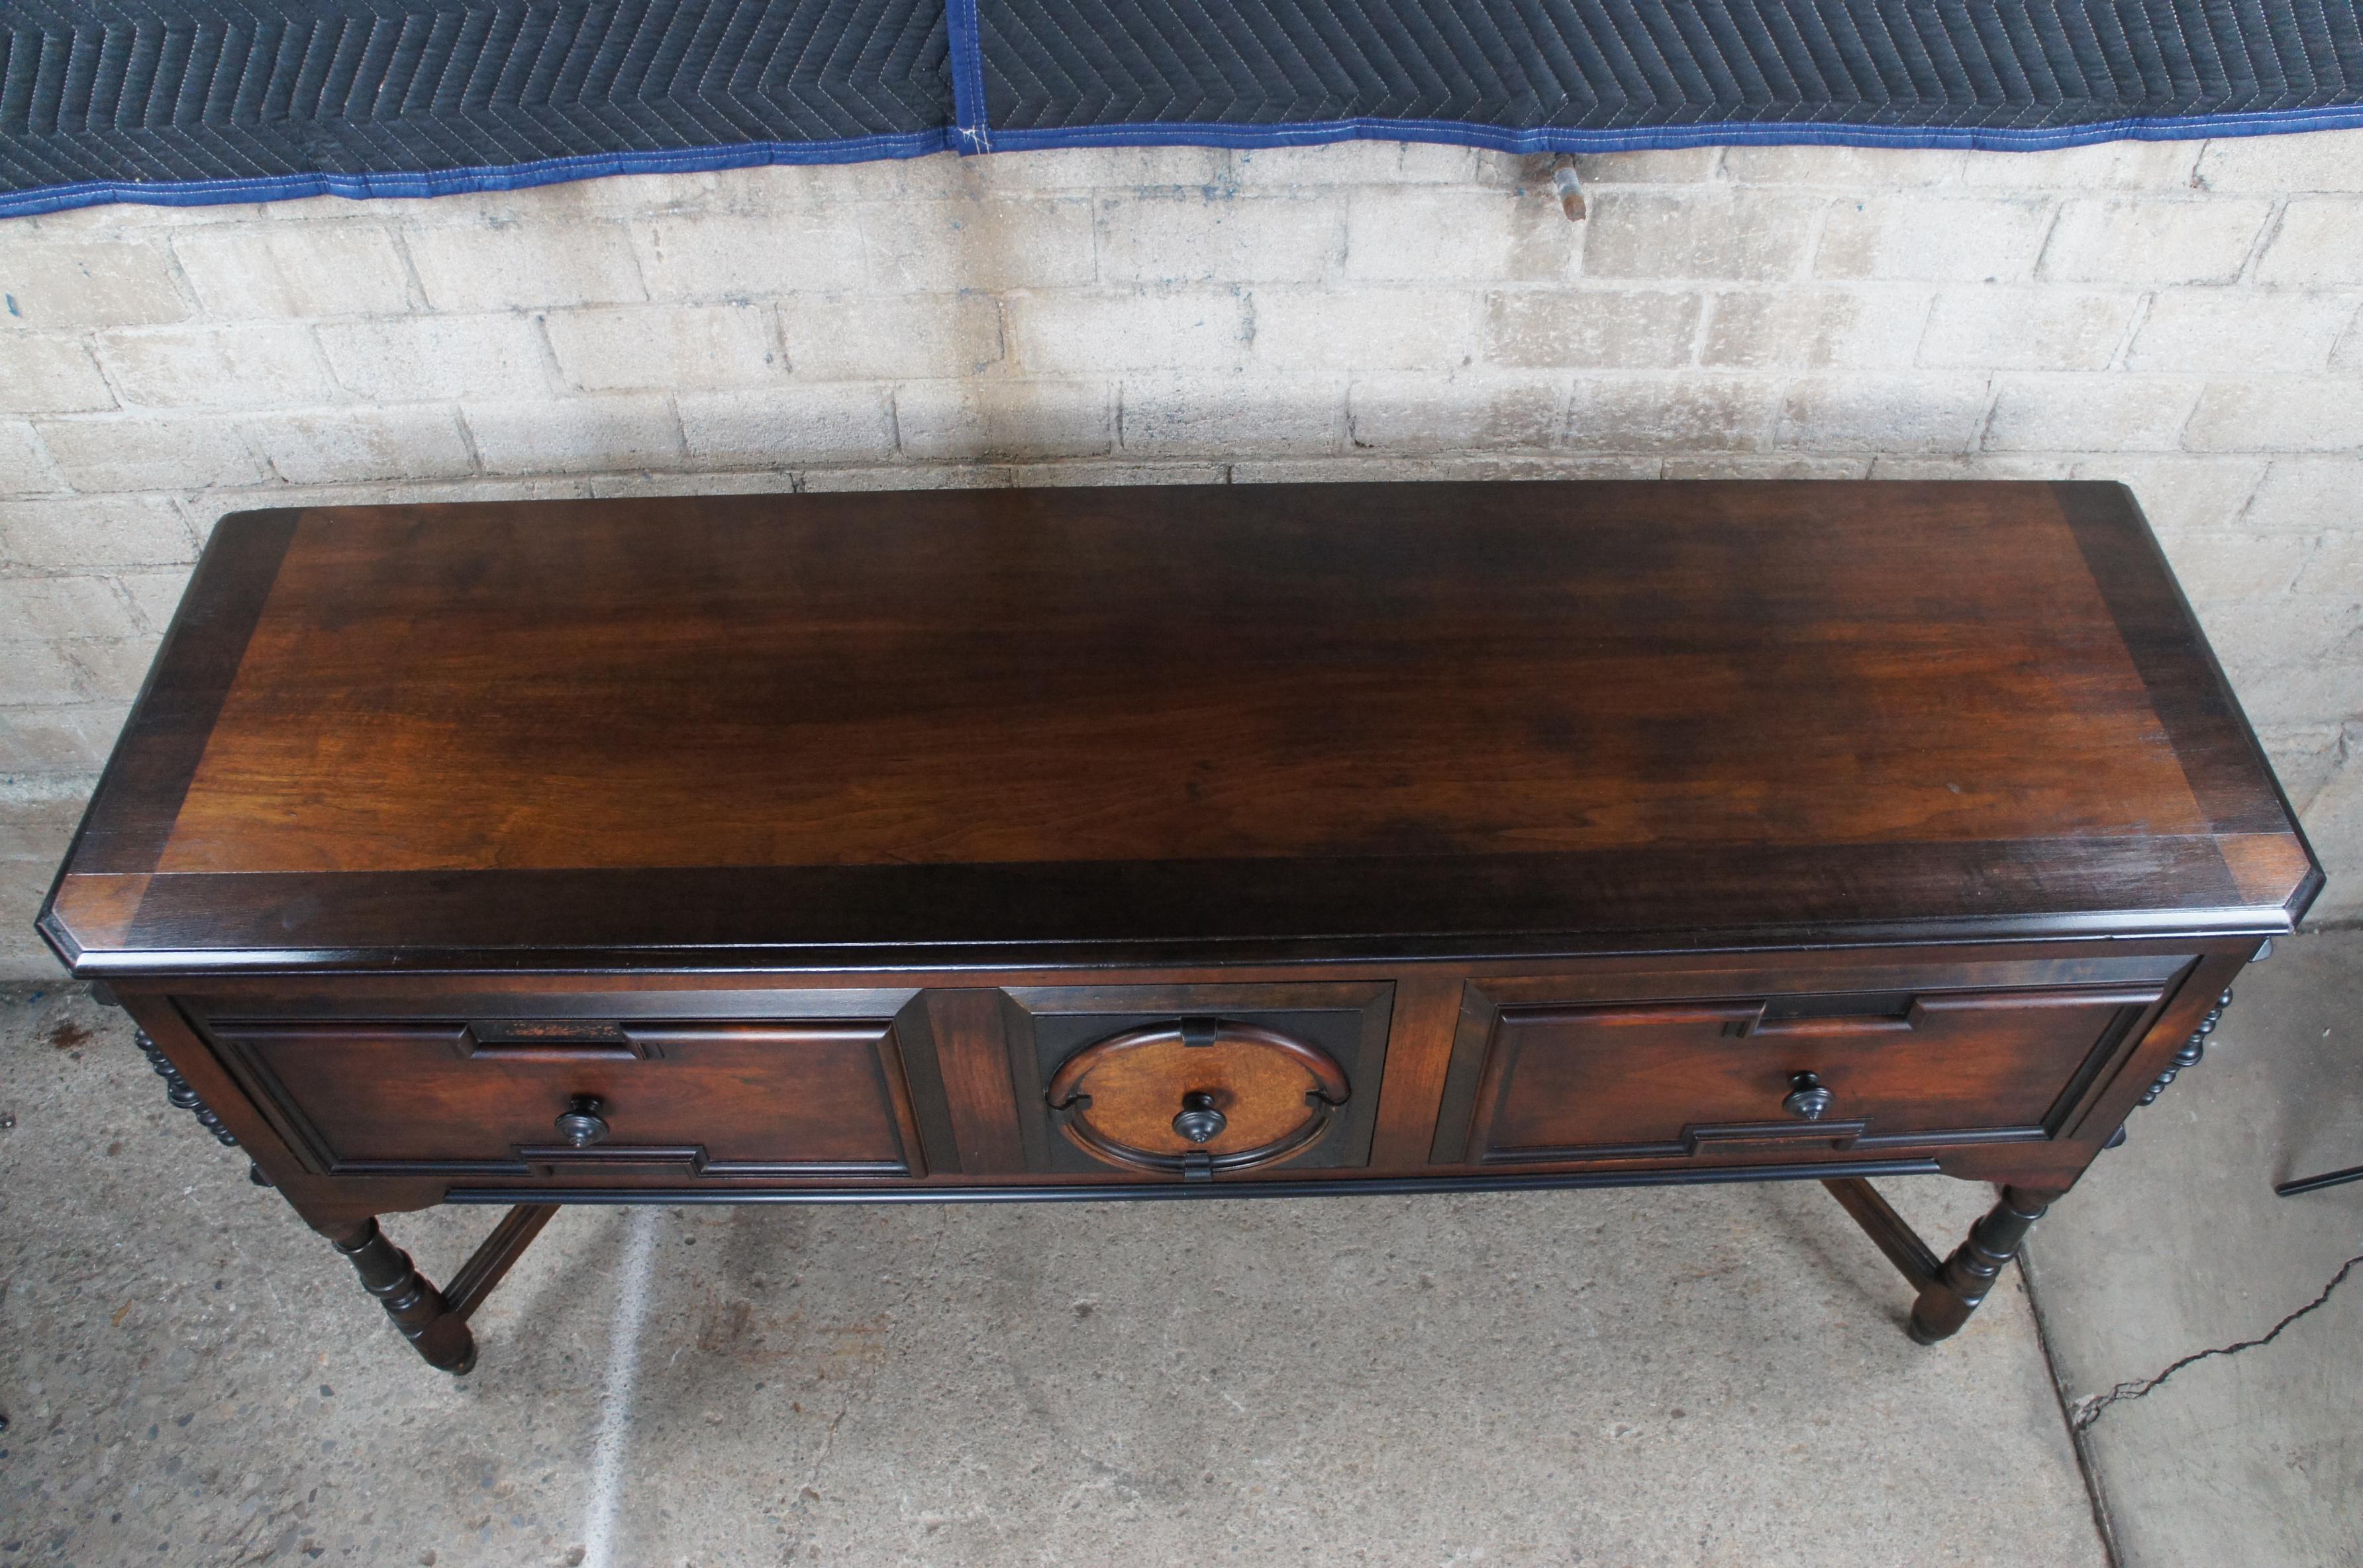 Mid-20th Century Paine Furniture Victorian Revival Walnut Carved Buffet Server Sideboard Console